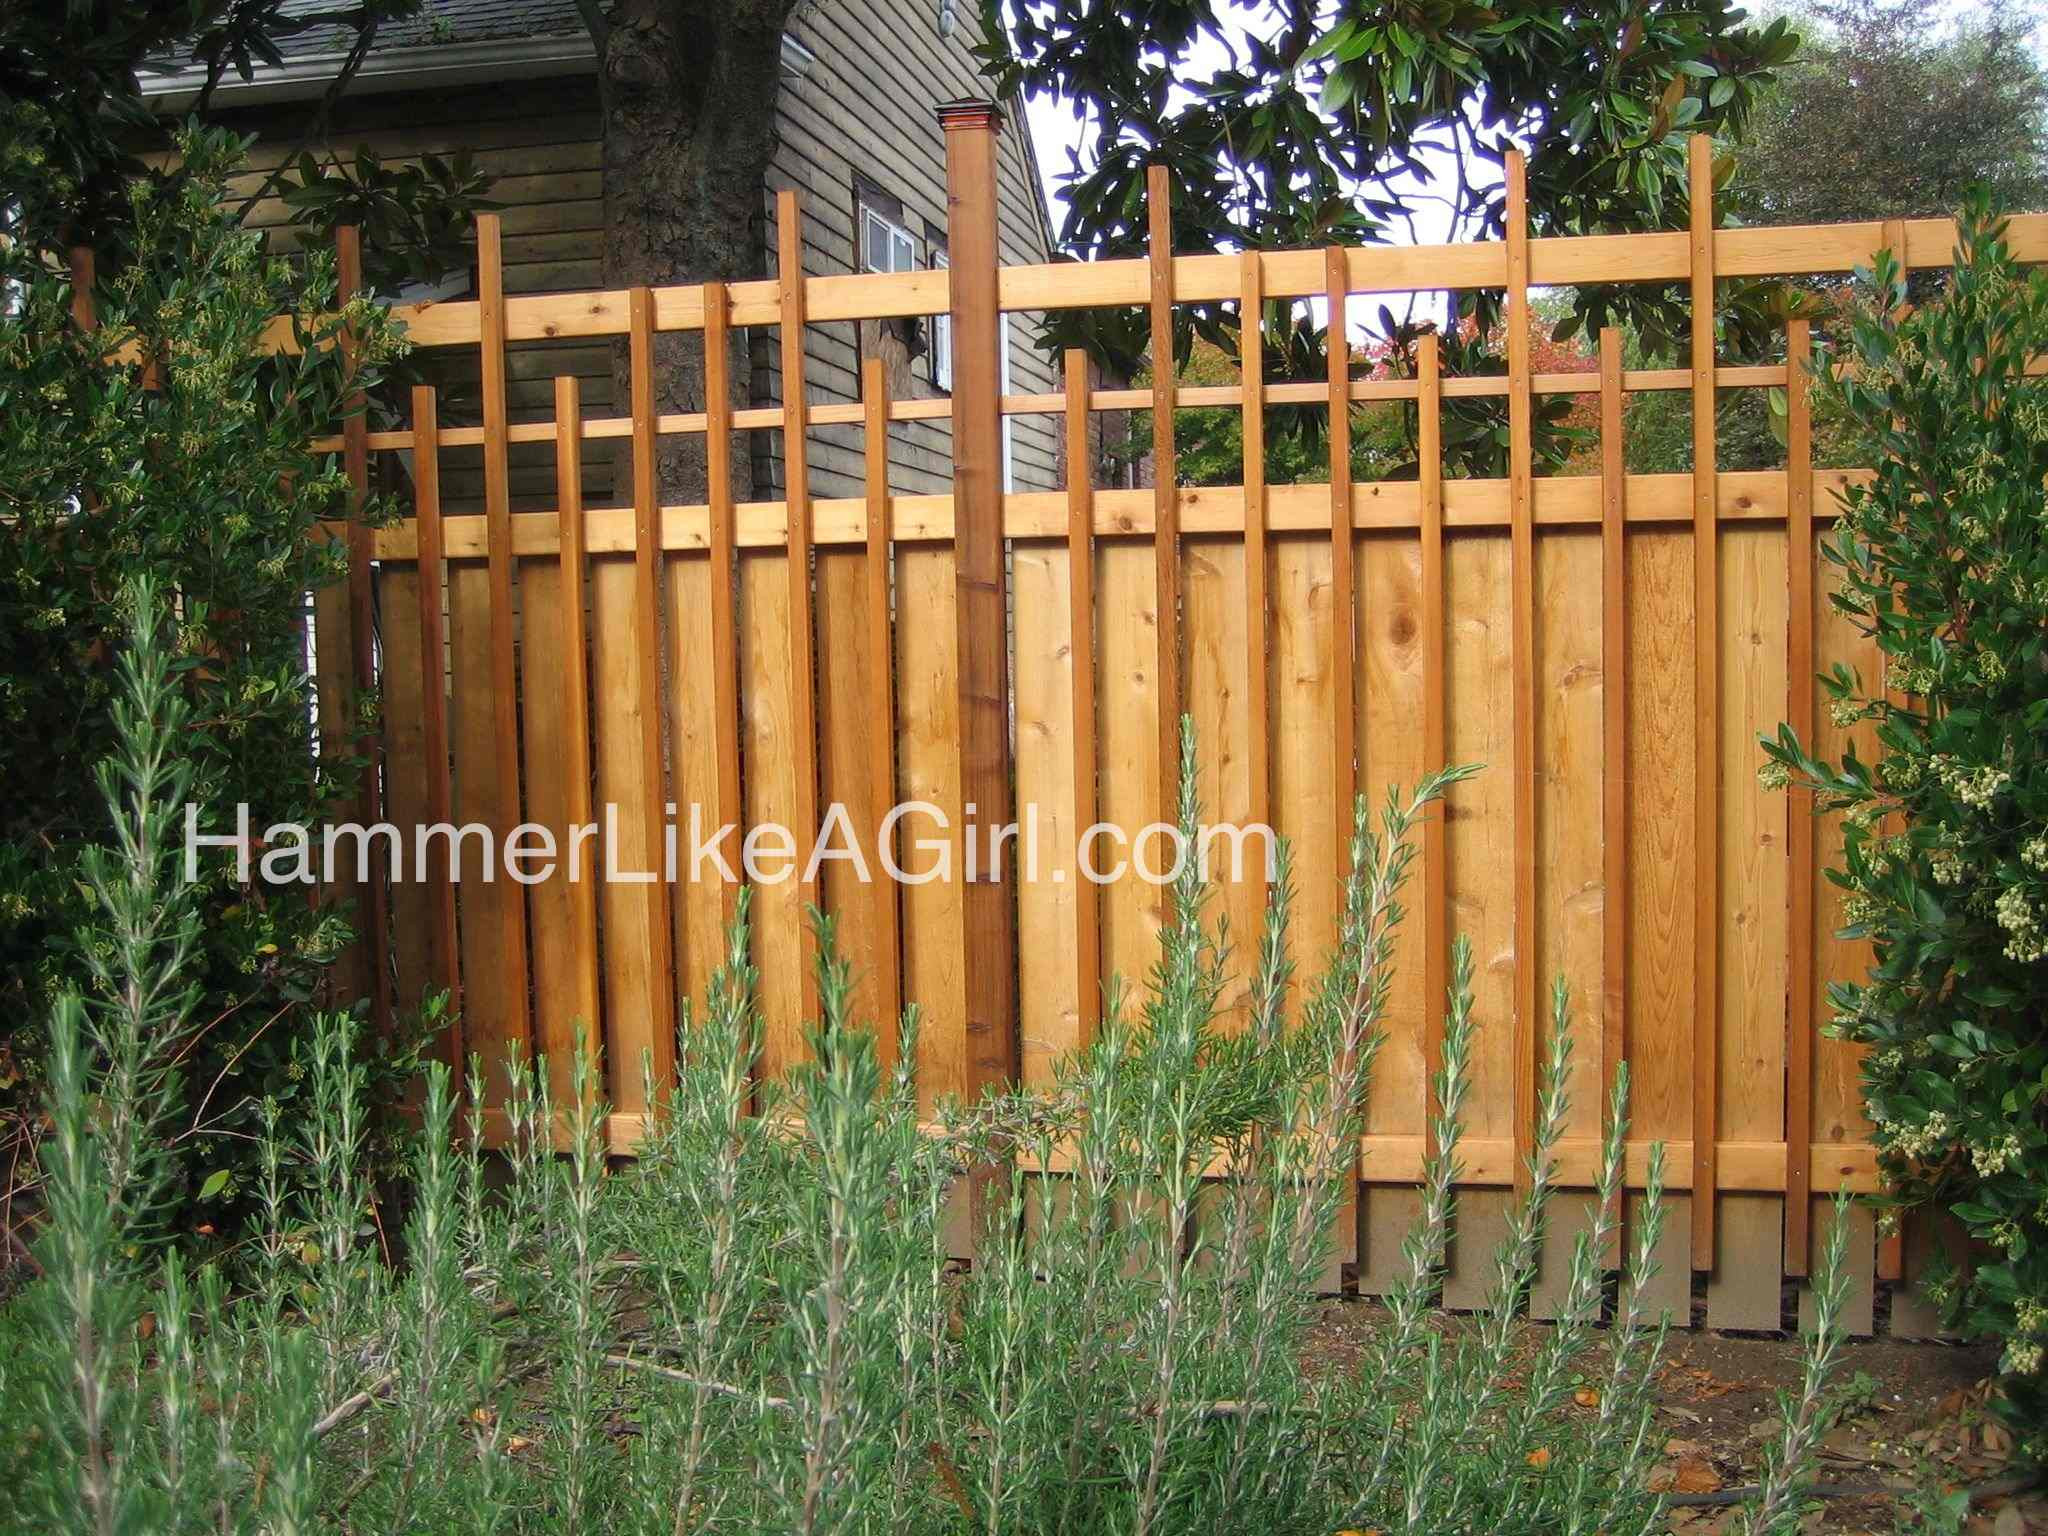 Best ideas about DIY Backyard Fence . Save or Pin DIY Arbor Fence Hammer Like a GirlHammer Like a Girl Now.